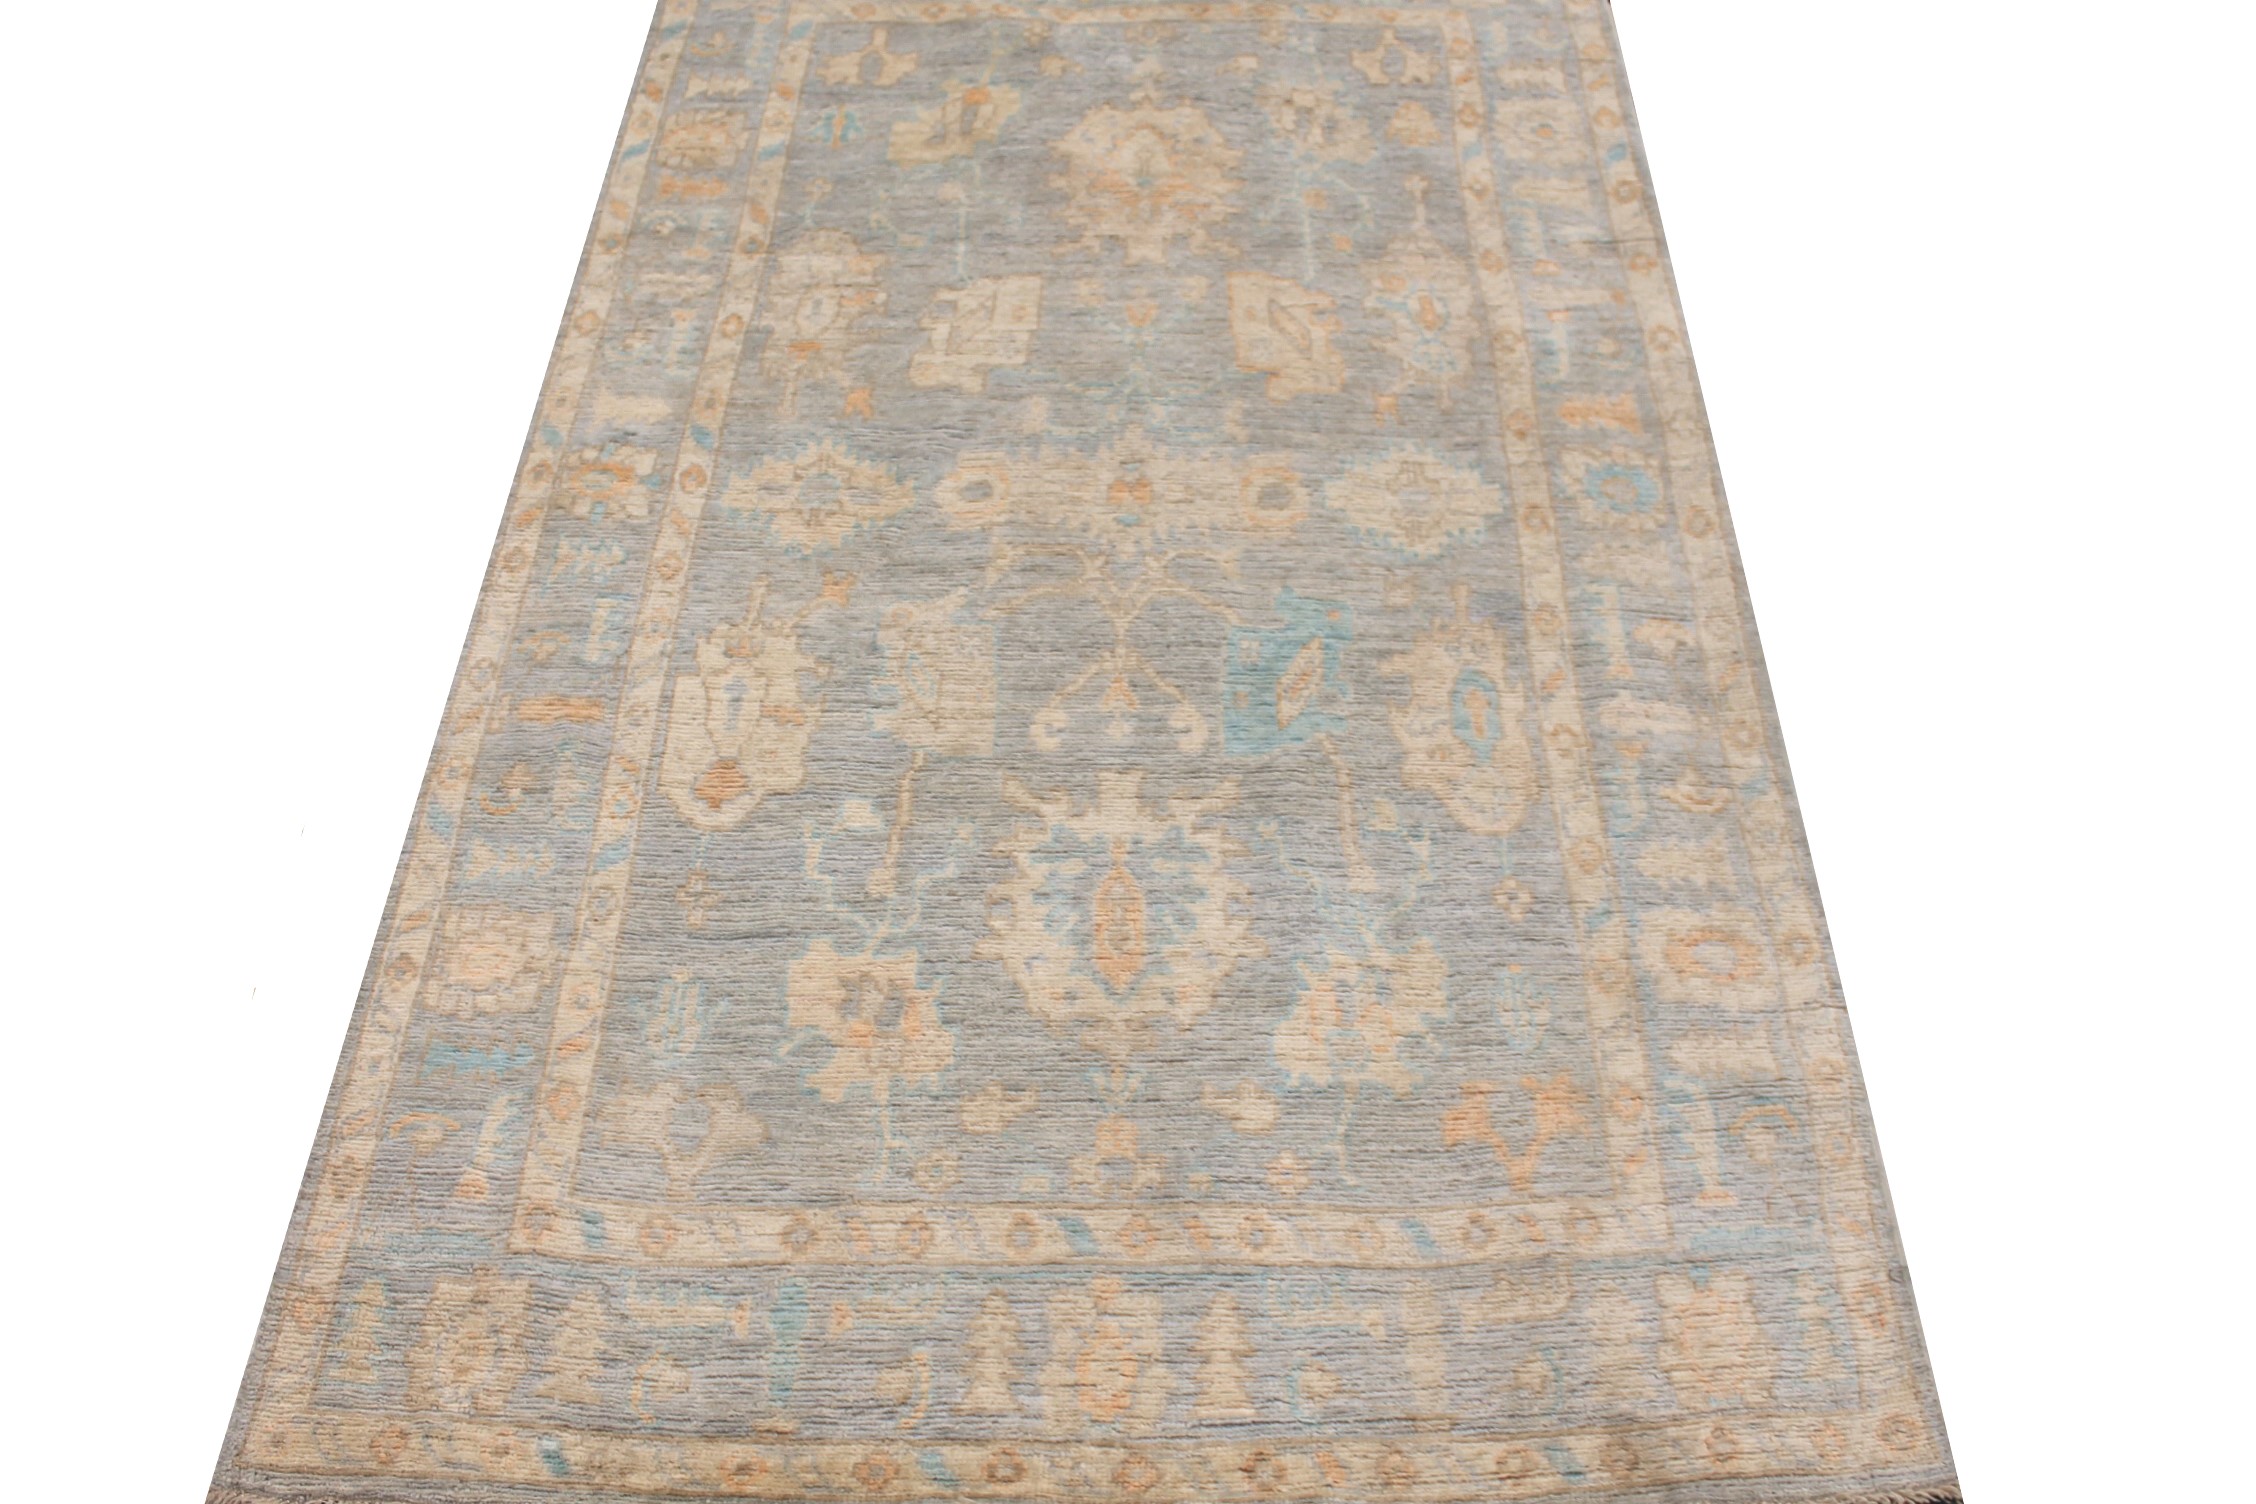 5x7/8 Oushak Hand Knotted Wool Area Rug - MR028103